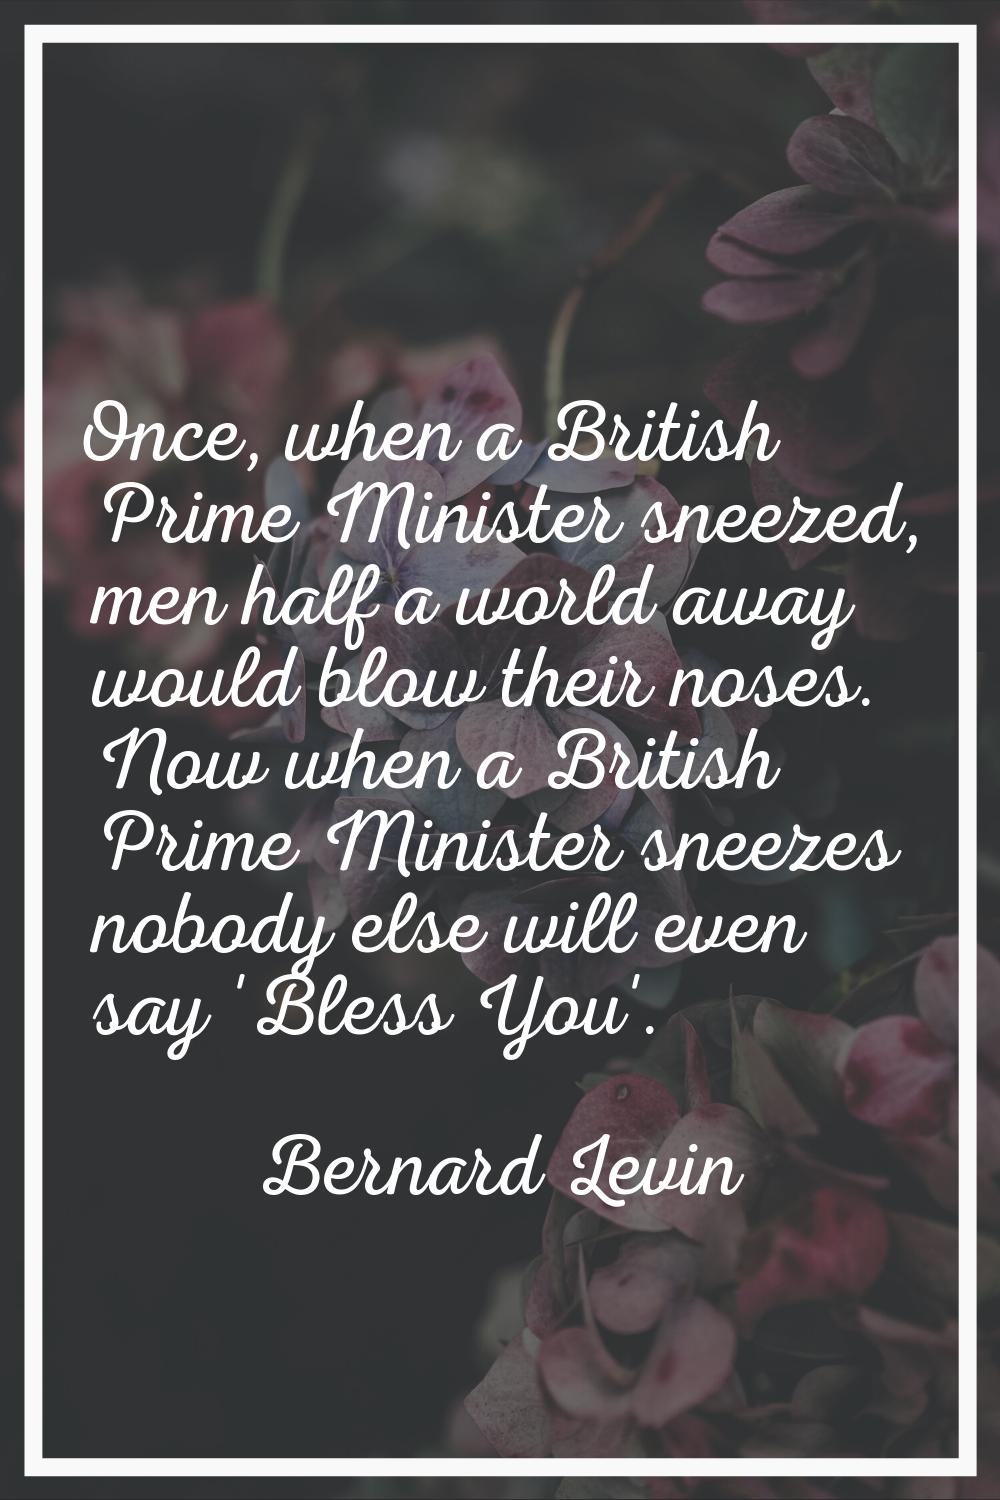 Once, when a British Prime Minister sneezed, men half a world away would blow their noses. Now when